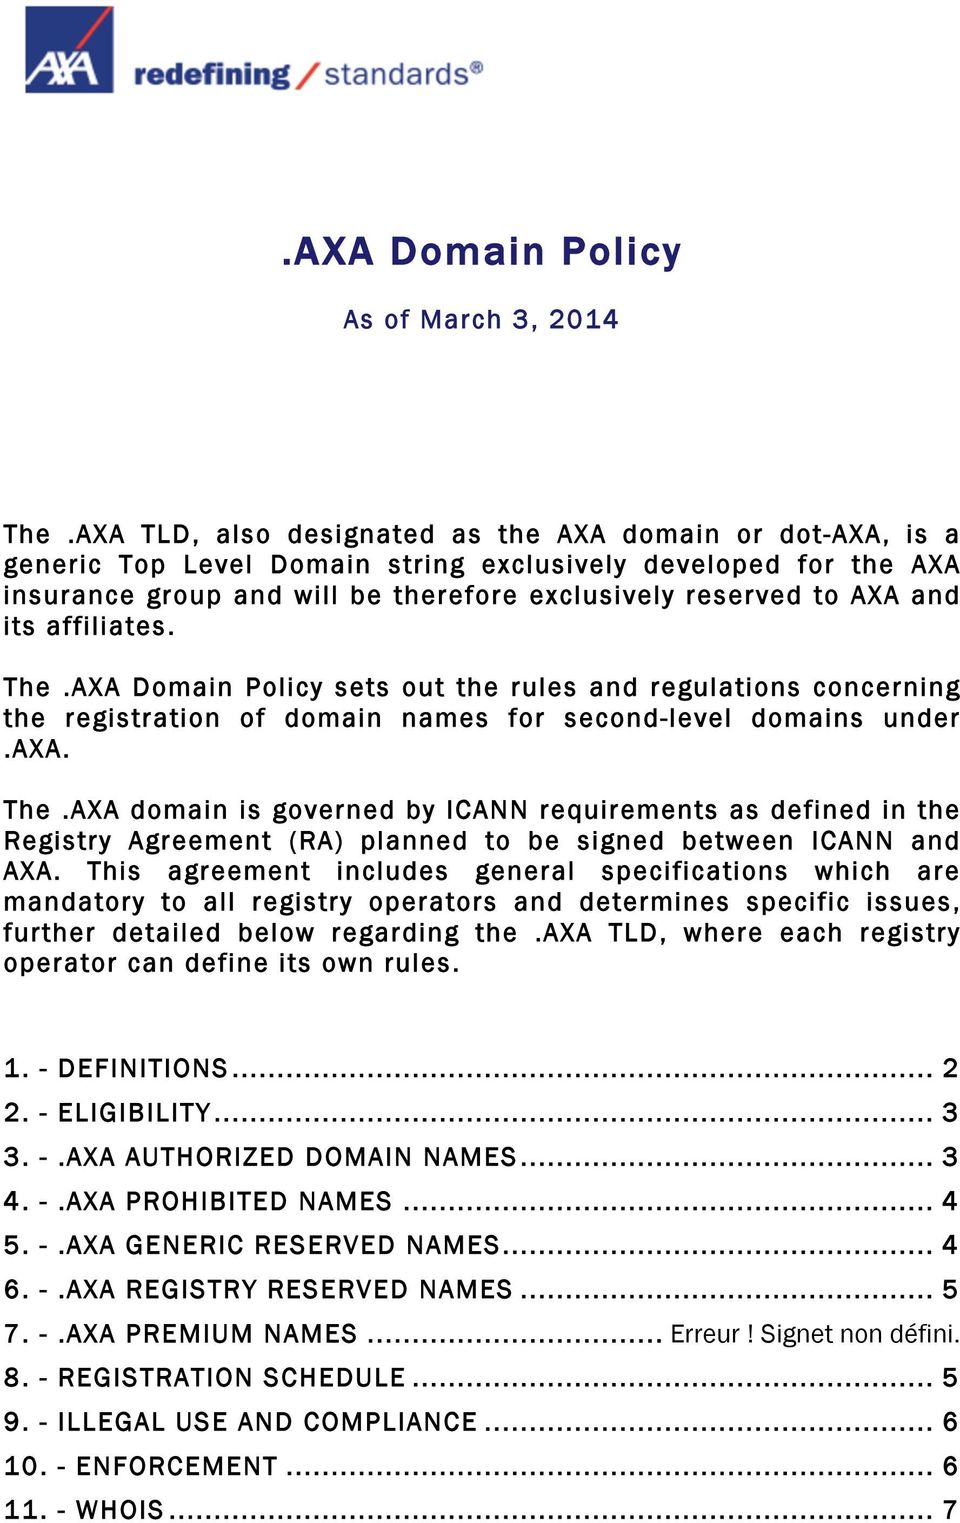 affiliates. The.AXA Domain Policy sets out the rules and regulations concerning the registration of domain names for second-level domains under.axa. The.AXA domain is governed by ICANN requirements as defined in the Registry Agreement (RA) planned to be signed between ICANN and AXA.